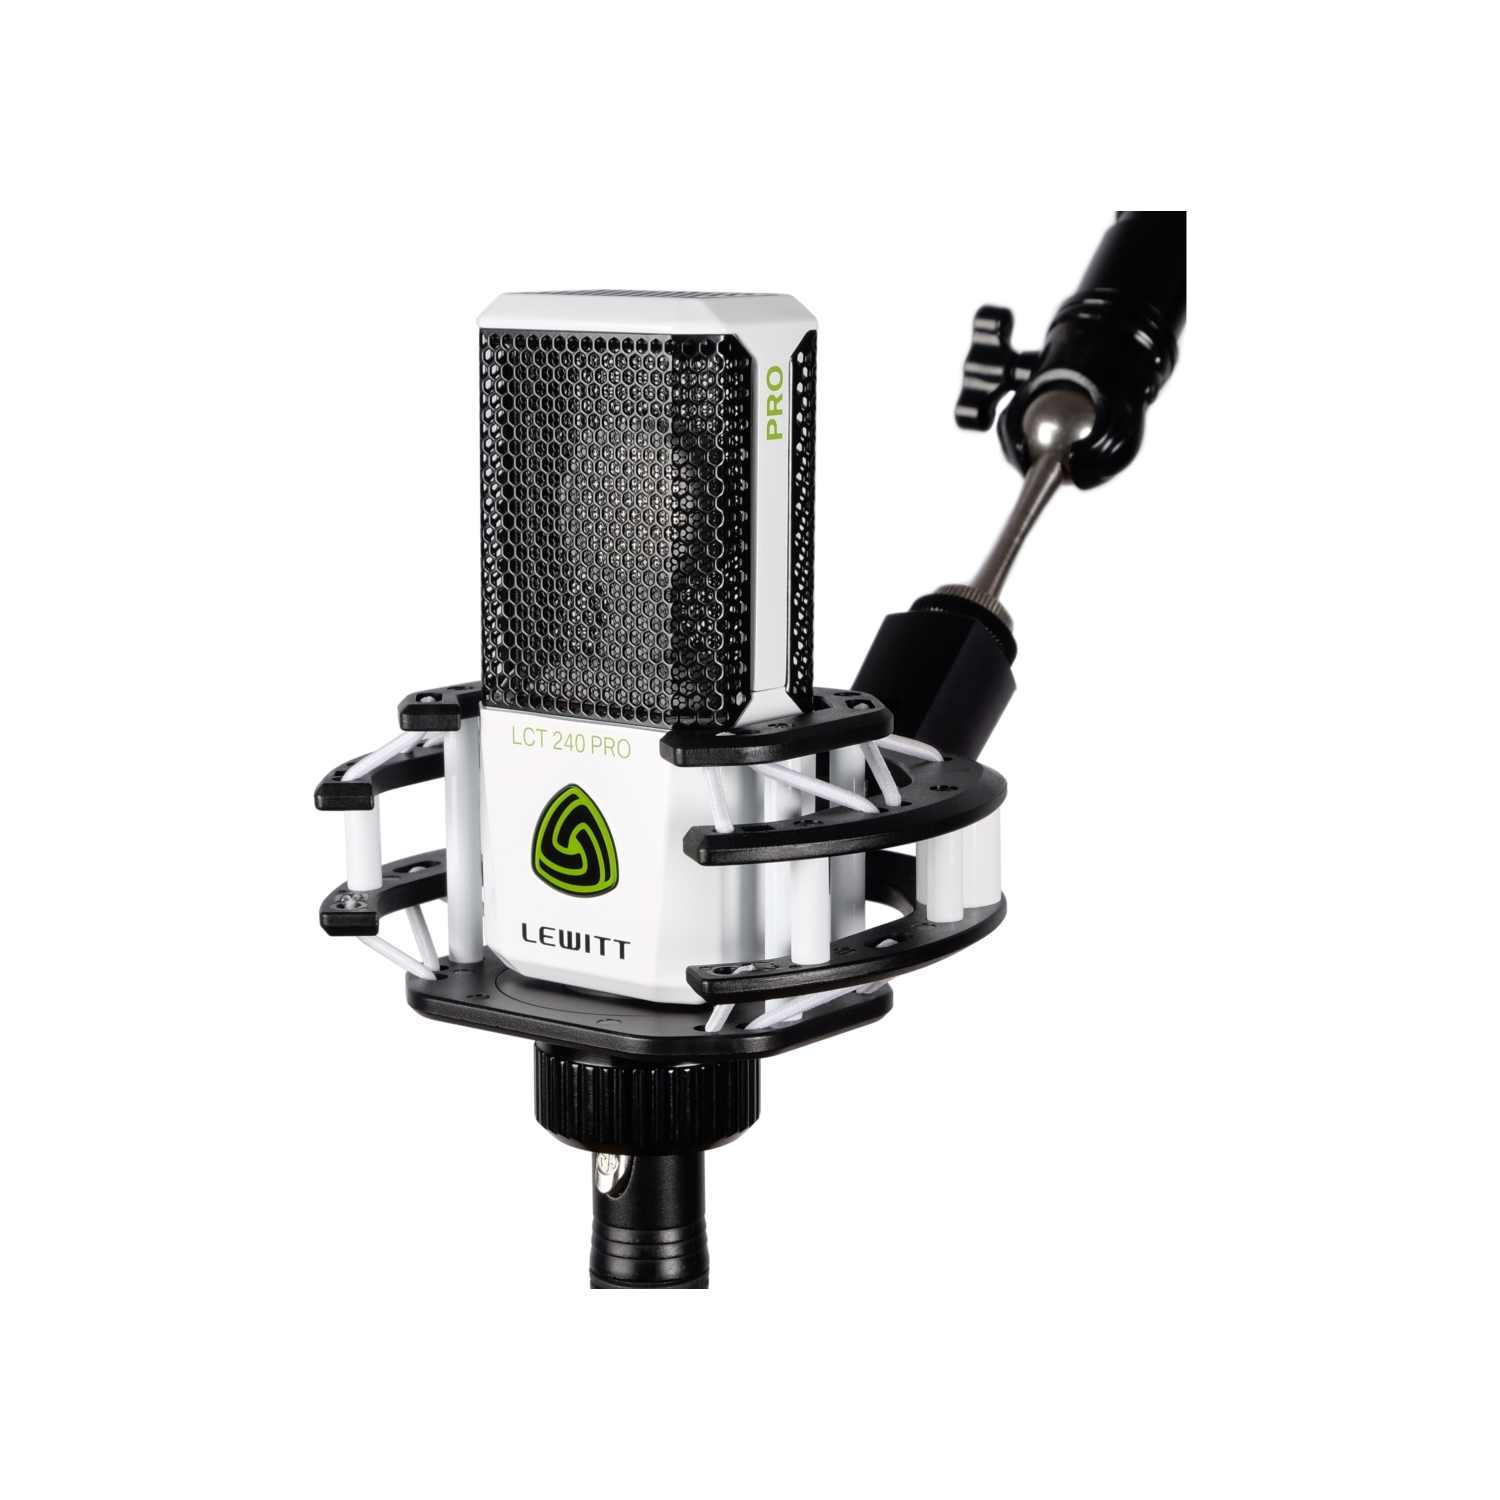 Lewitt LCT 240 Pro Condenser Microphone Value Pack - White